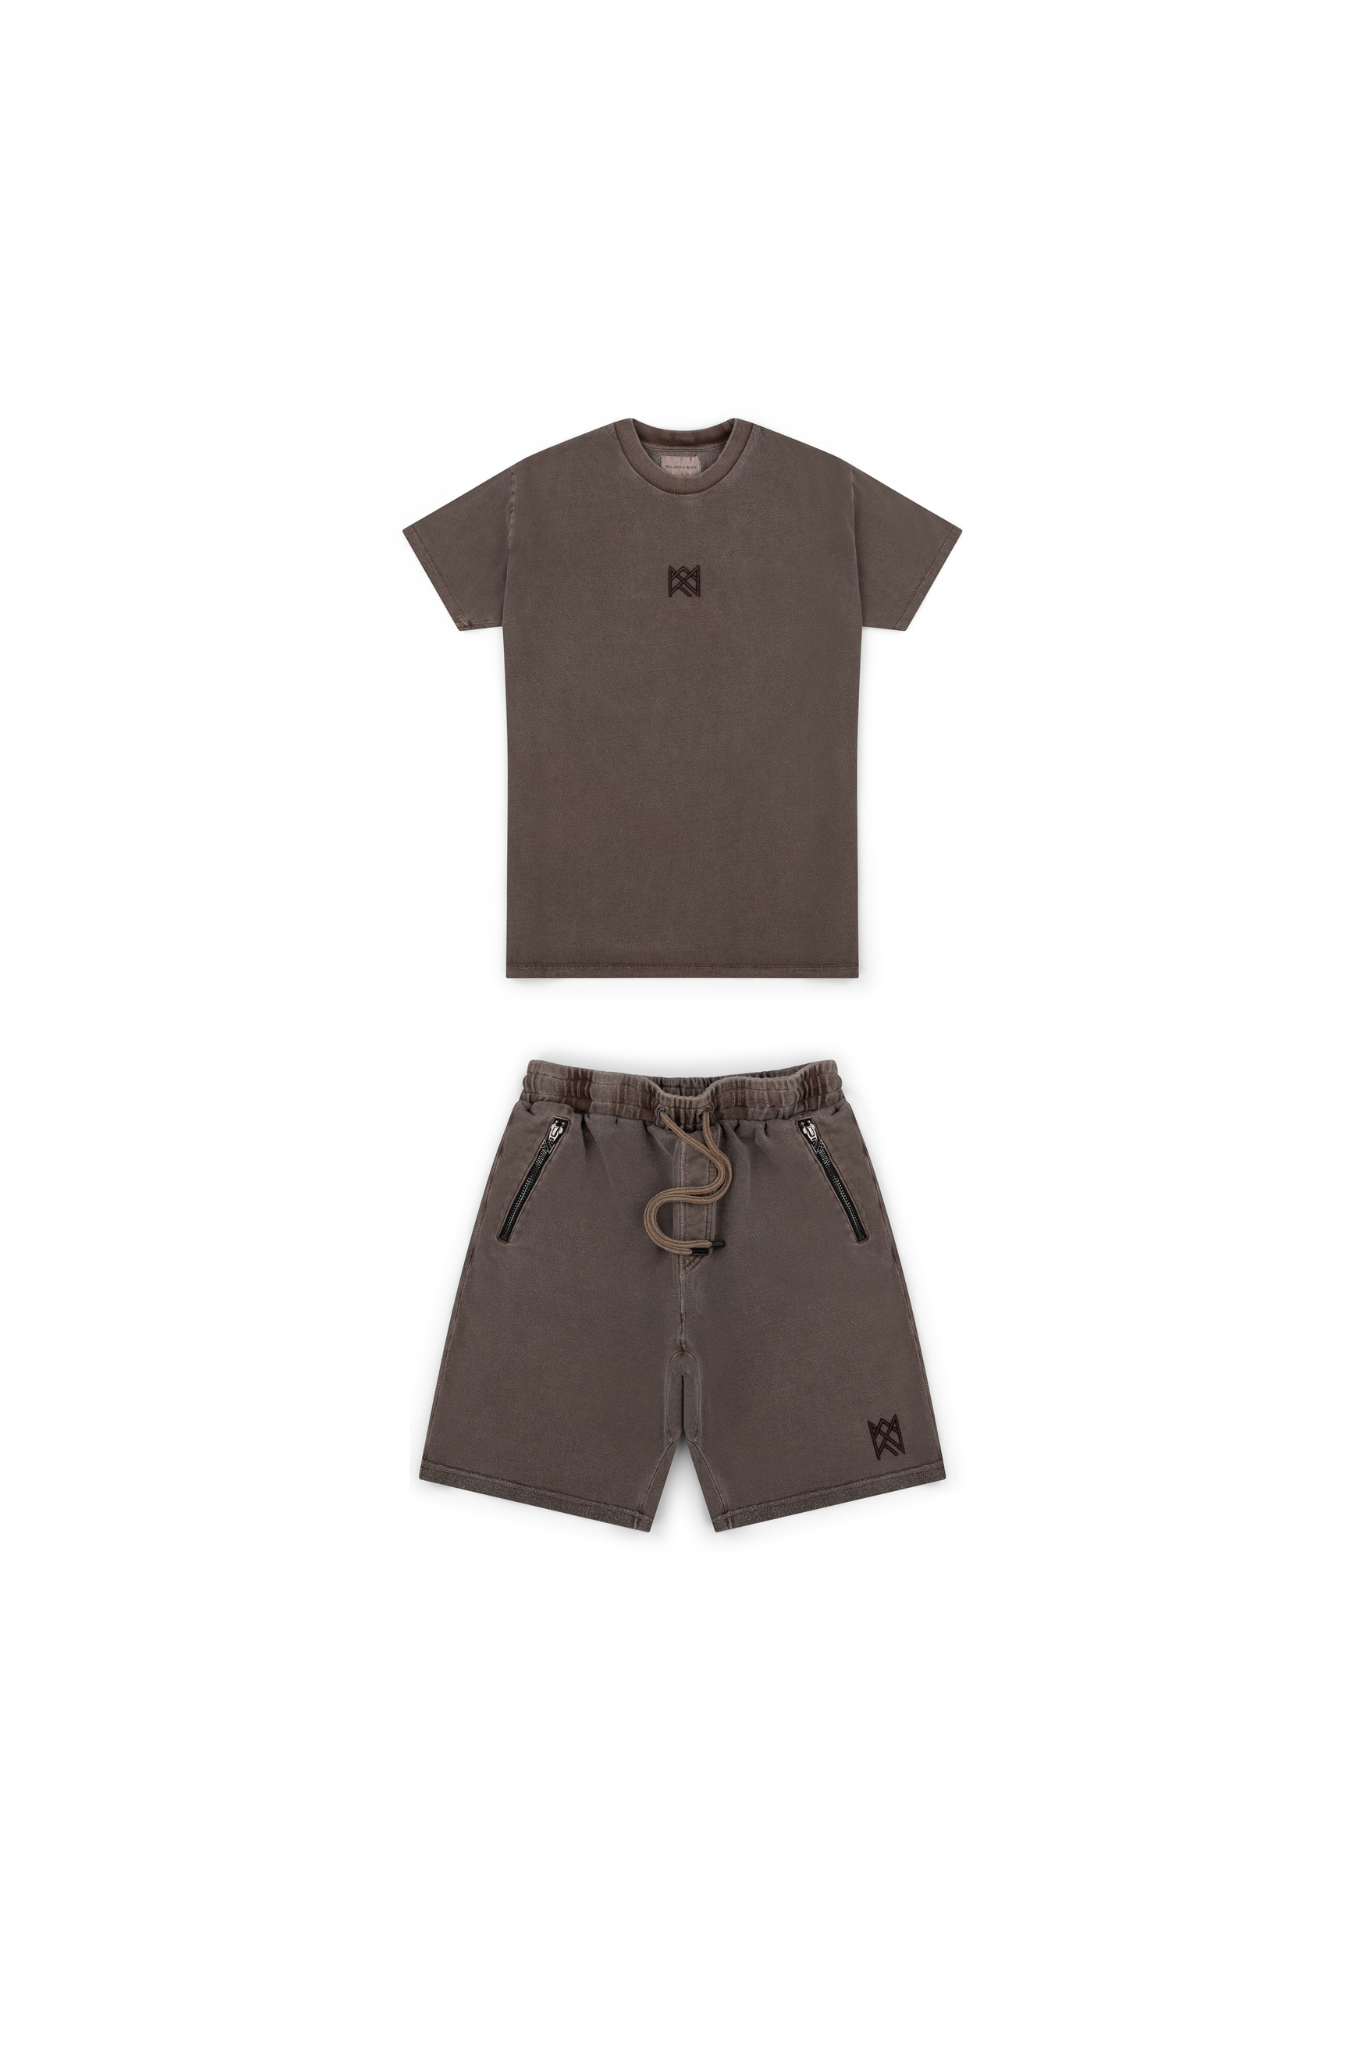 Real Artistic People - Oversized Heir Tee and Shorts Set - Vintage Chocolate